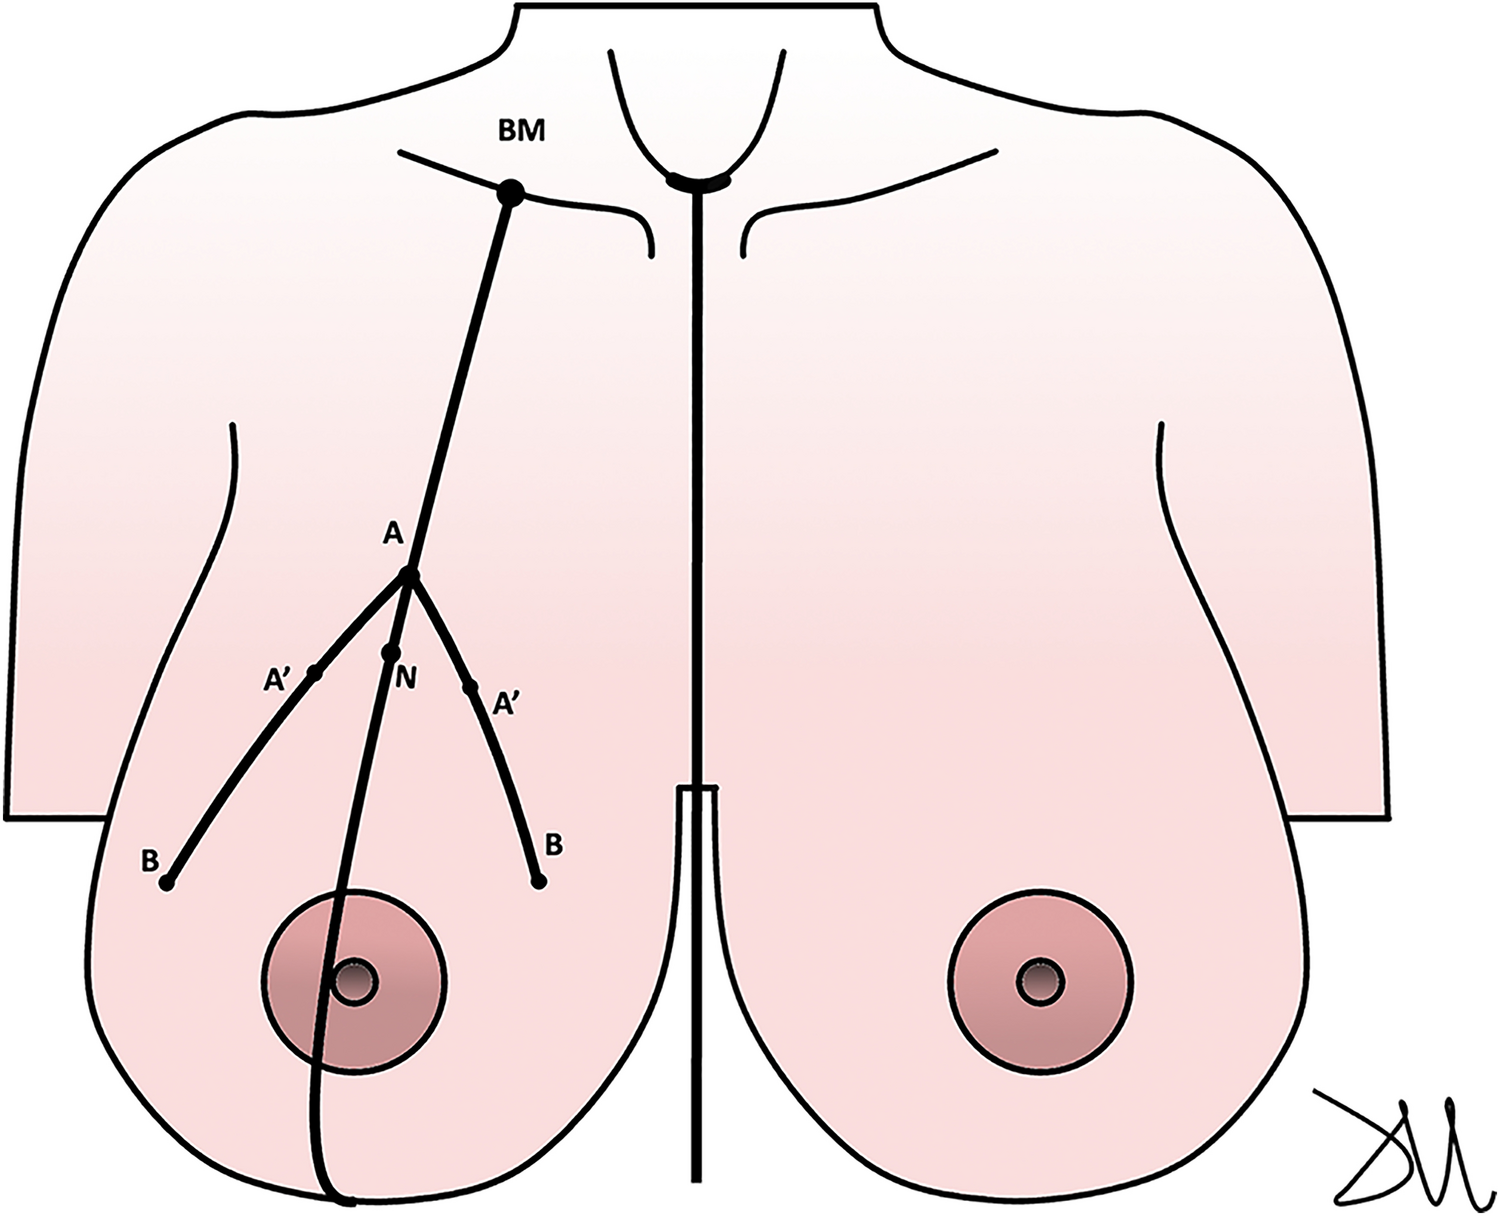 Marking the nipple–areola complex in mastopexy and reduction mammoplasty: a geometrical method